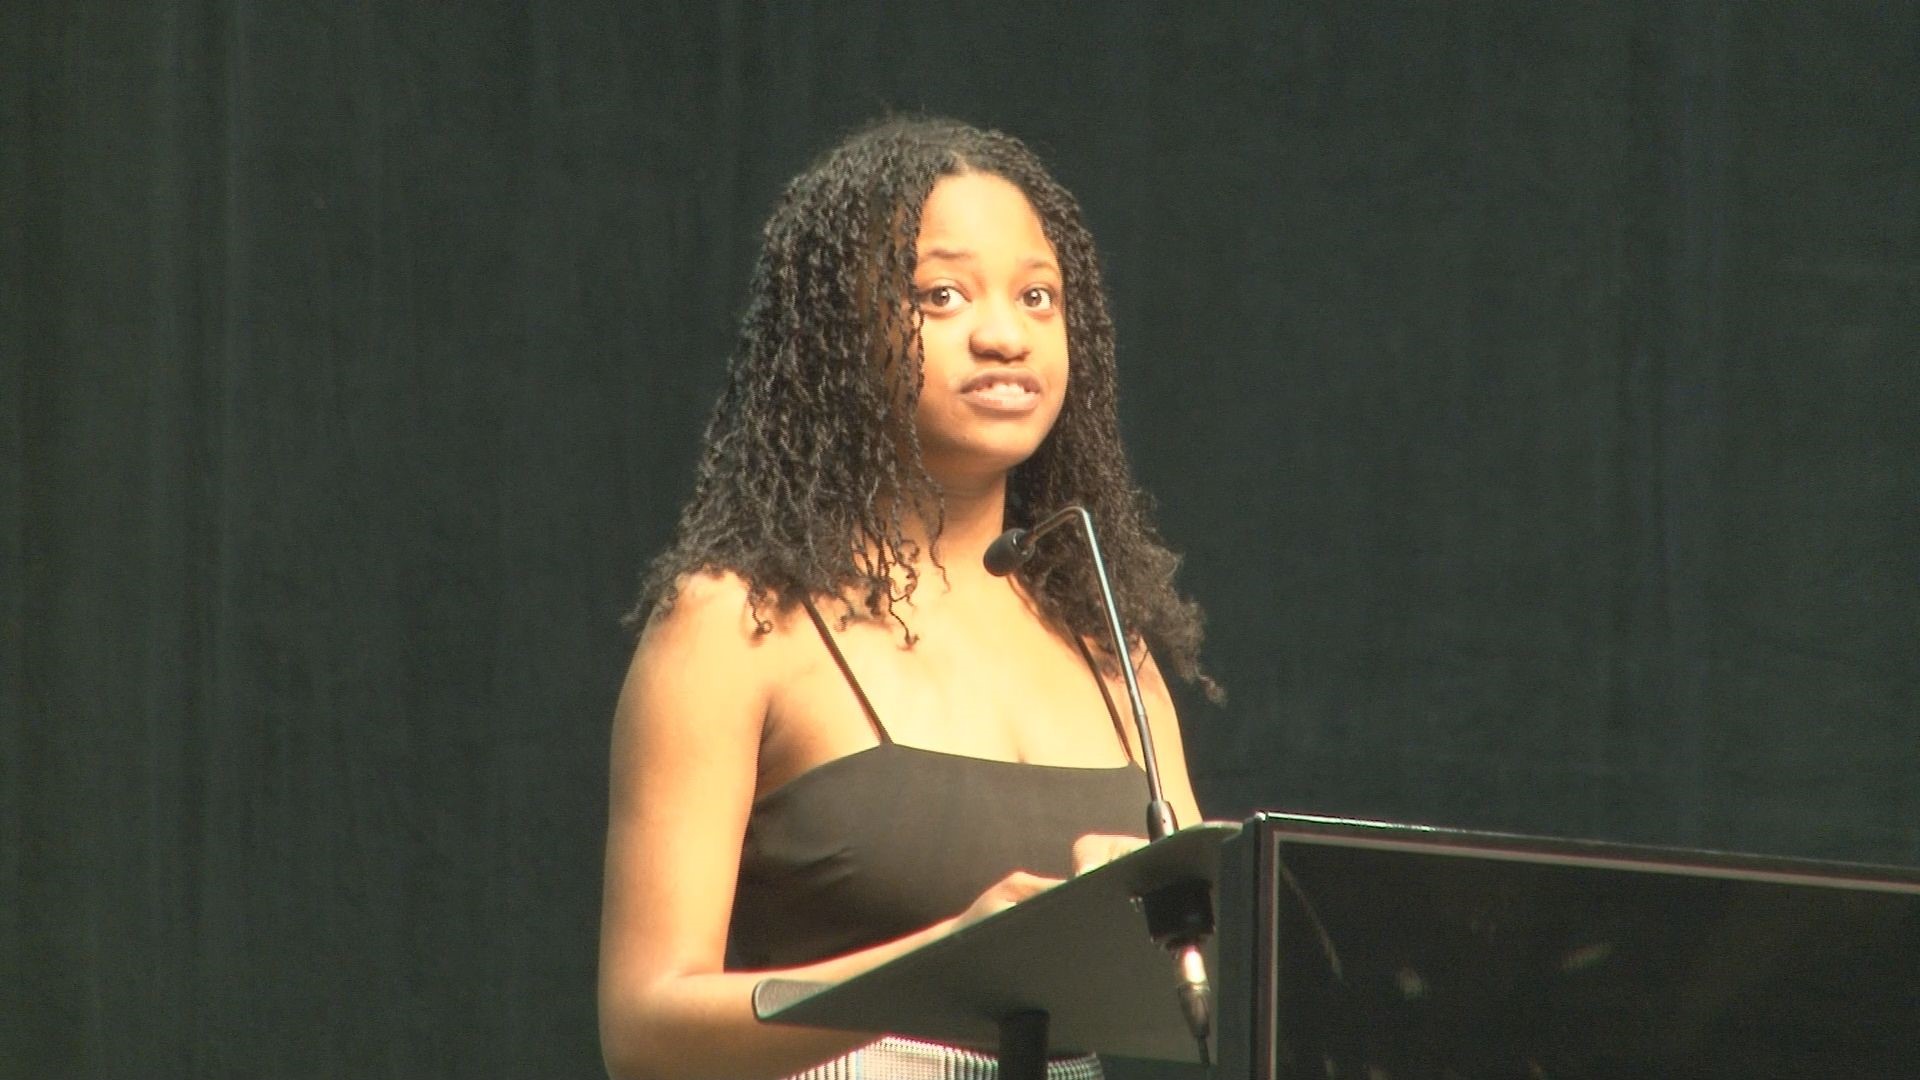 Northeast High School graduate Kennedy Randall shared her personal struggles and how she finished on top during her graduation speech.